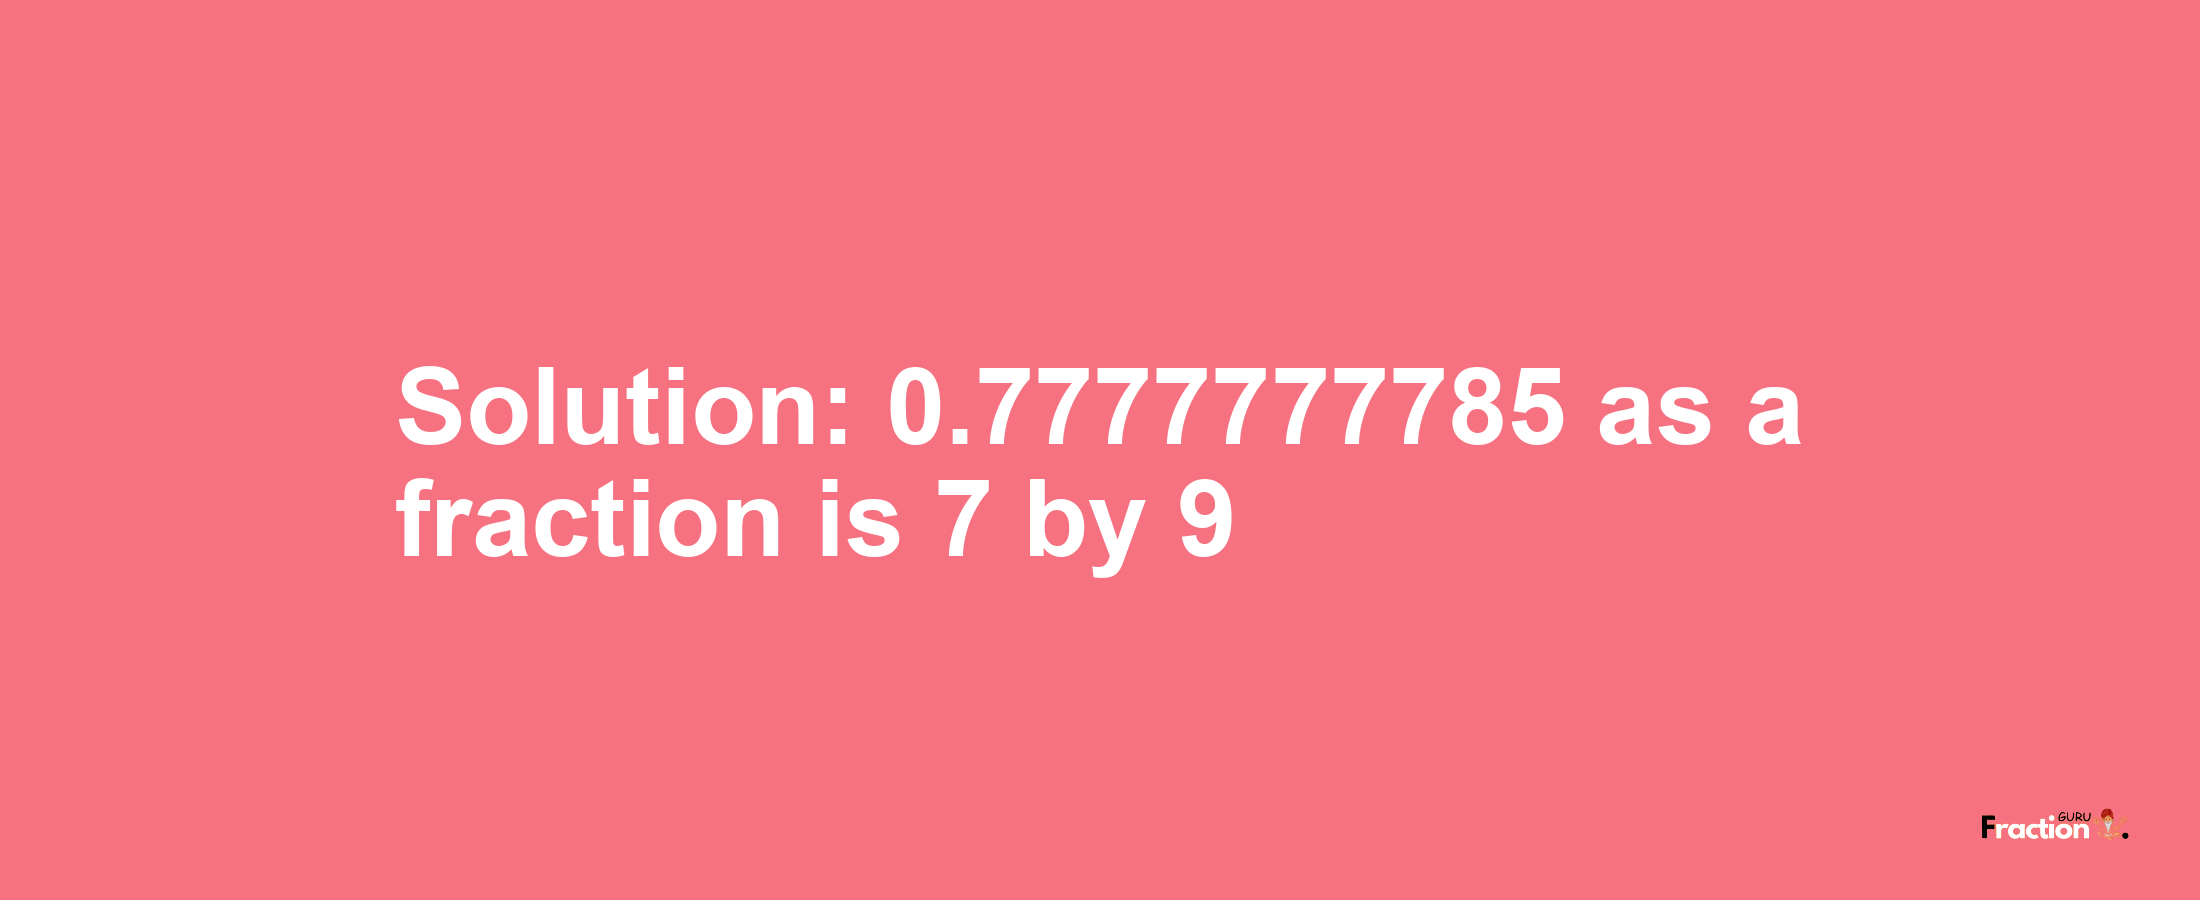 Solution:0.7777777785 as a fraction is 7/9